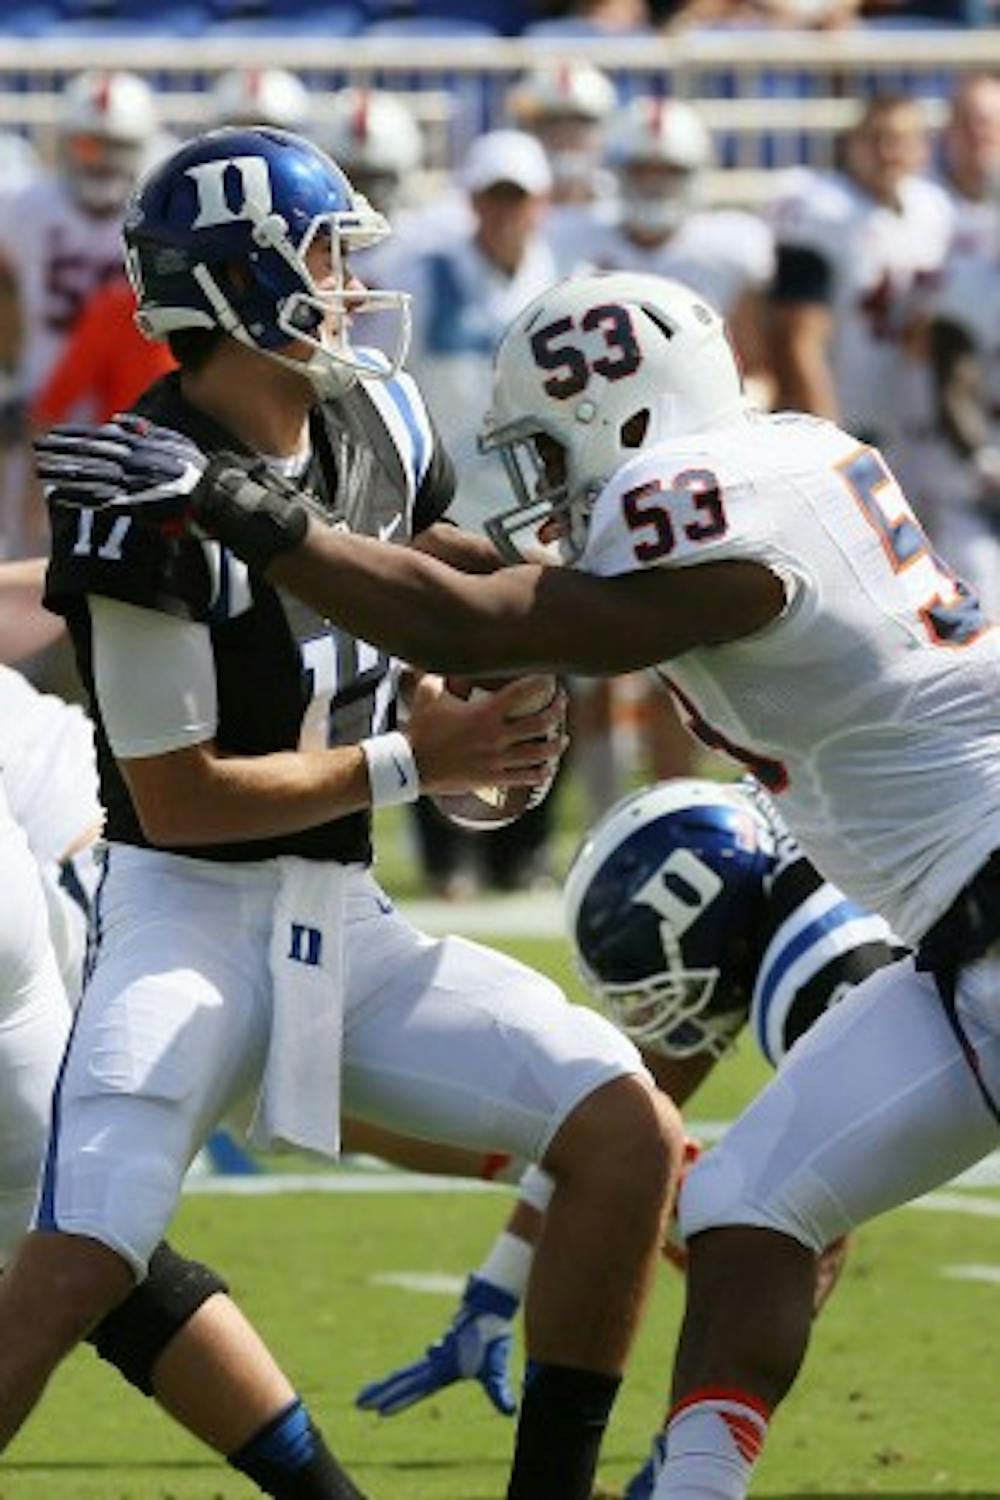 <p>Junior linebacker Micah Kiser,&nbsp;who leads the ACC in tackles, has been a leader of a Virginia defense which has steadily&nbsp;improved its play this season.</p>